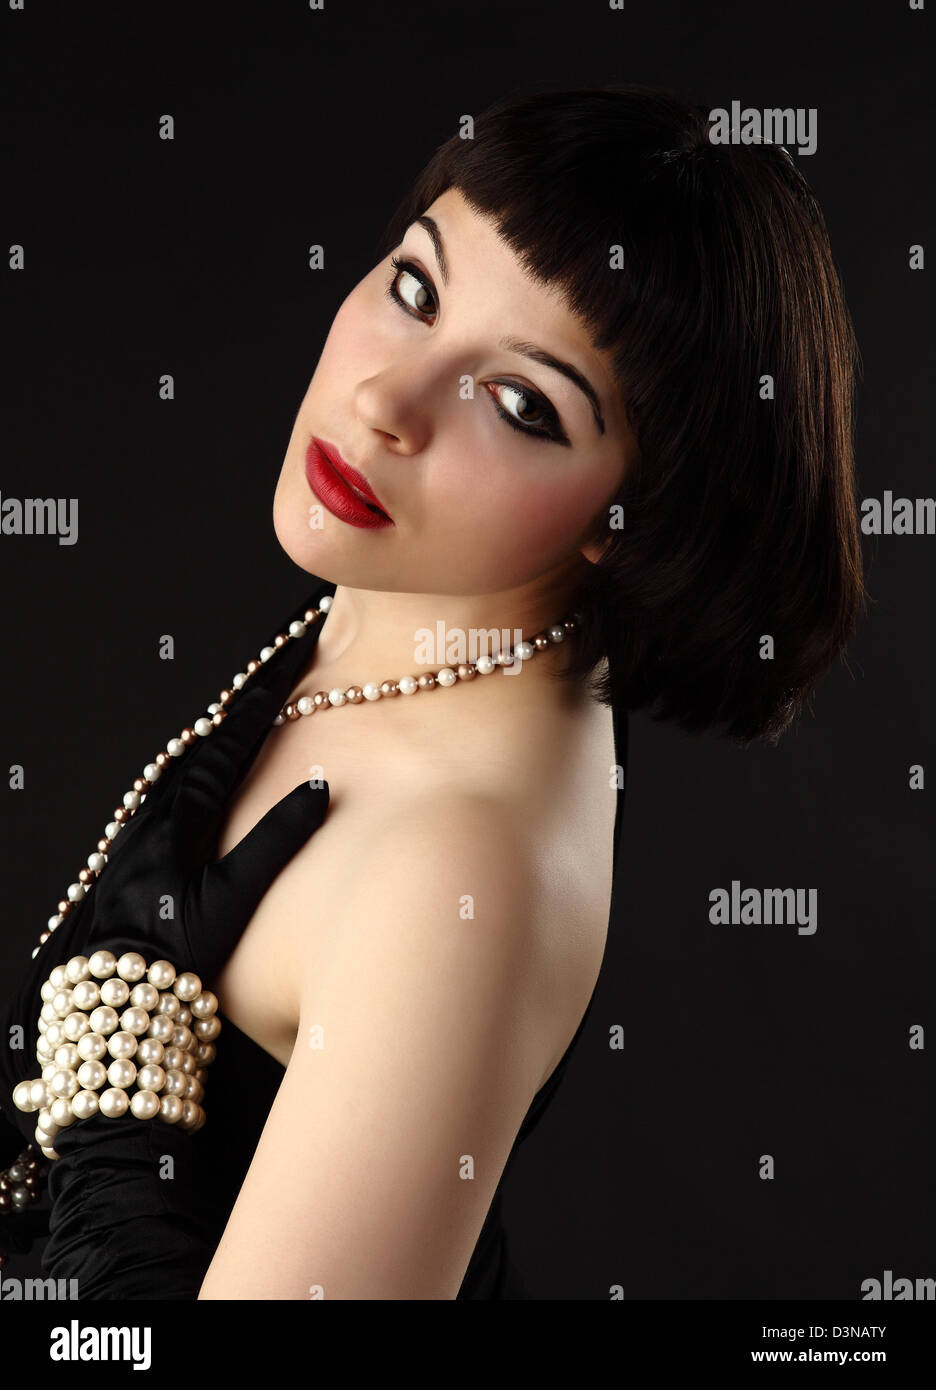 vintage styled portrait of a young beautiful woman Stock Photo